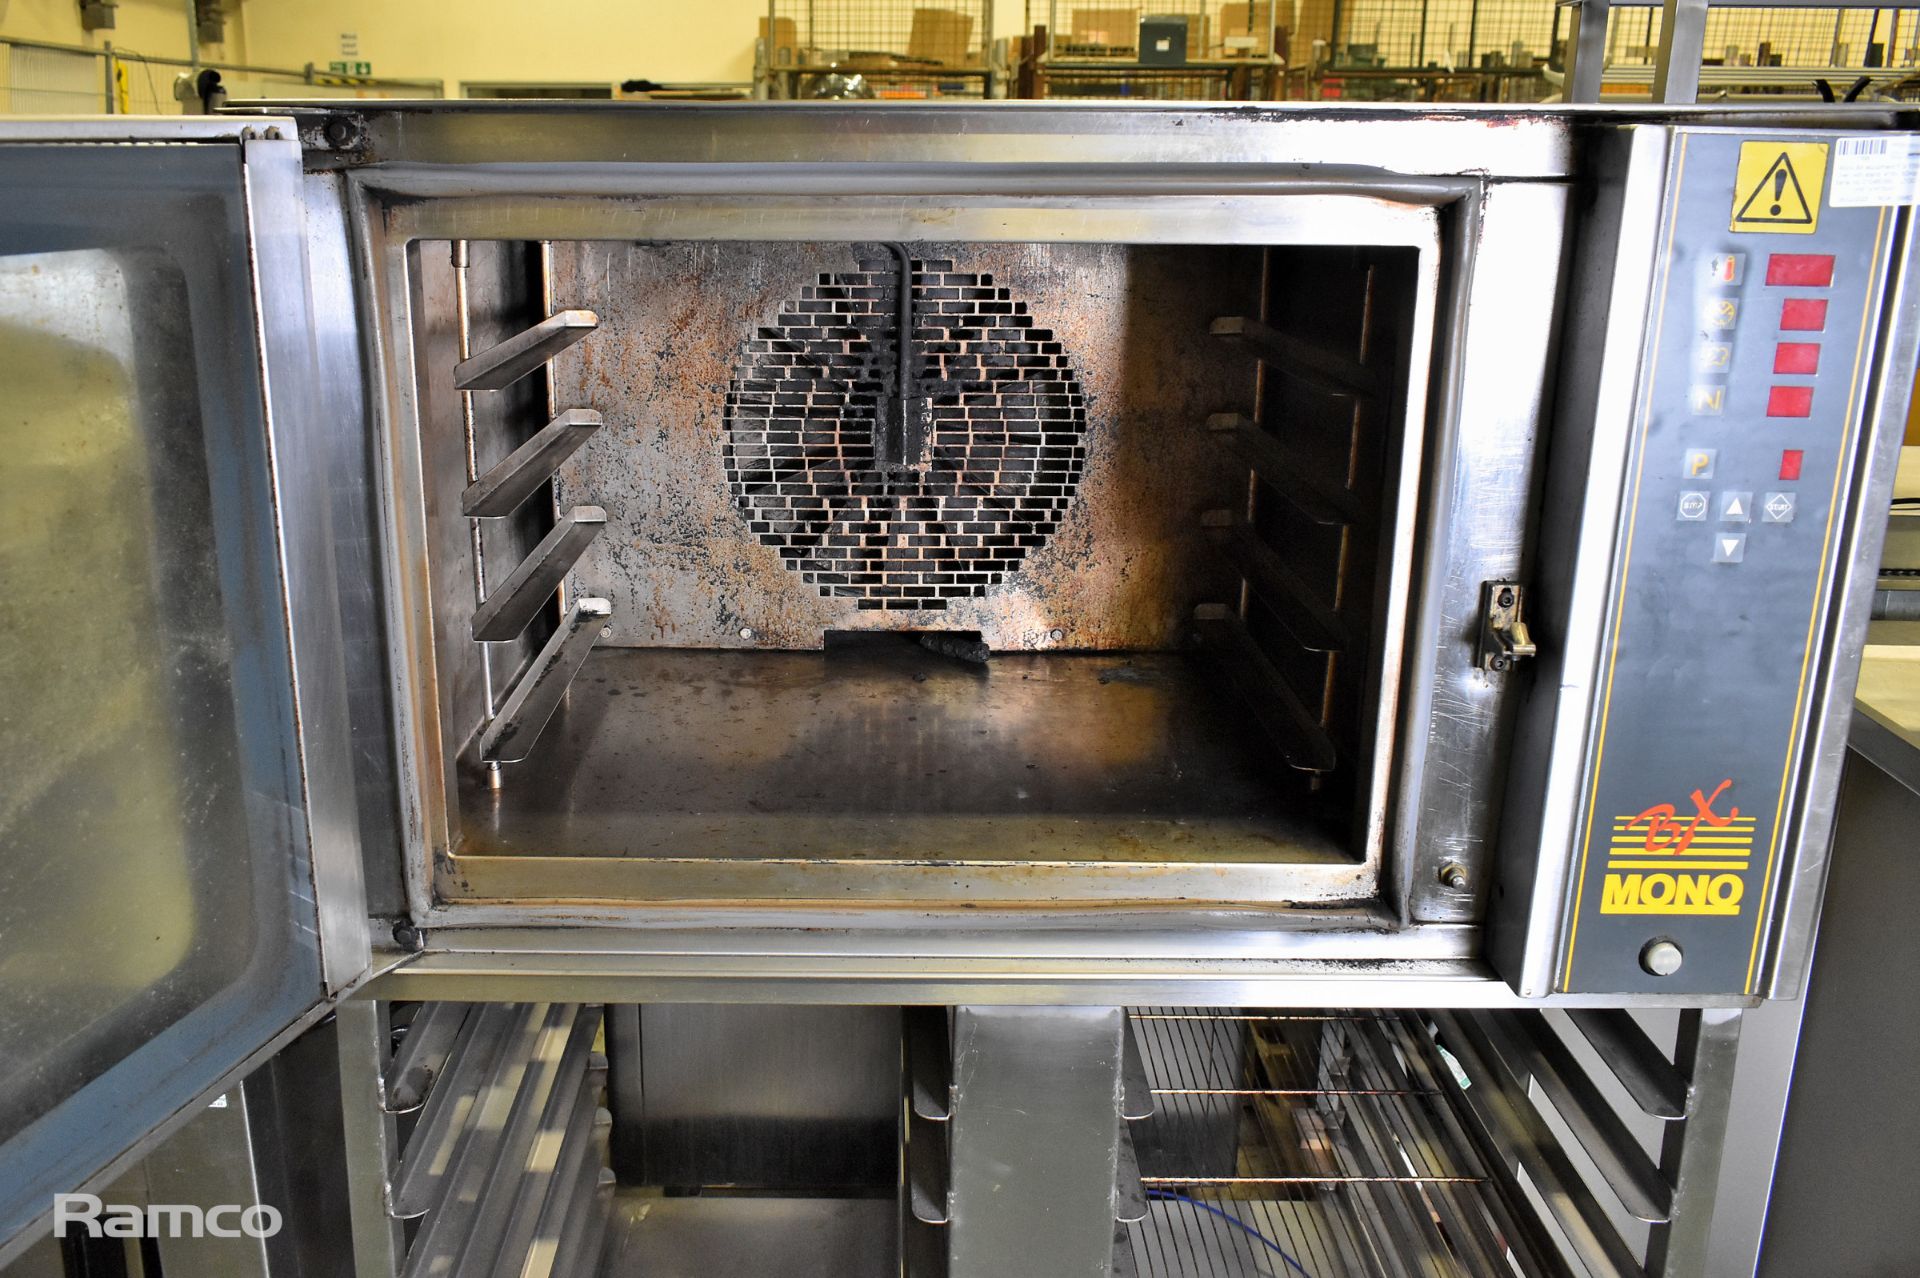 Mono BX equipment FG 15B Oven with stand, 415V 50Hz - Serial No 010460360 - L100 x W87 x H150cm - Image 3 of 7